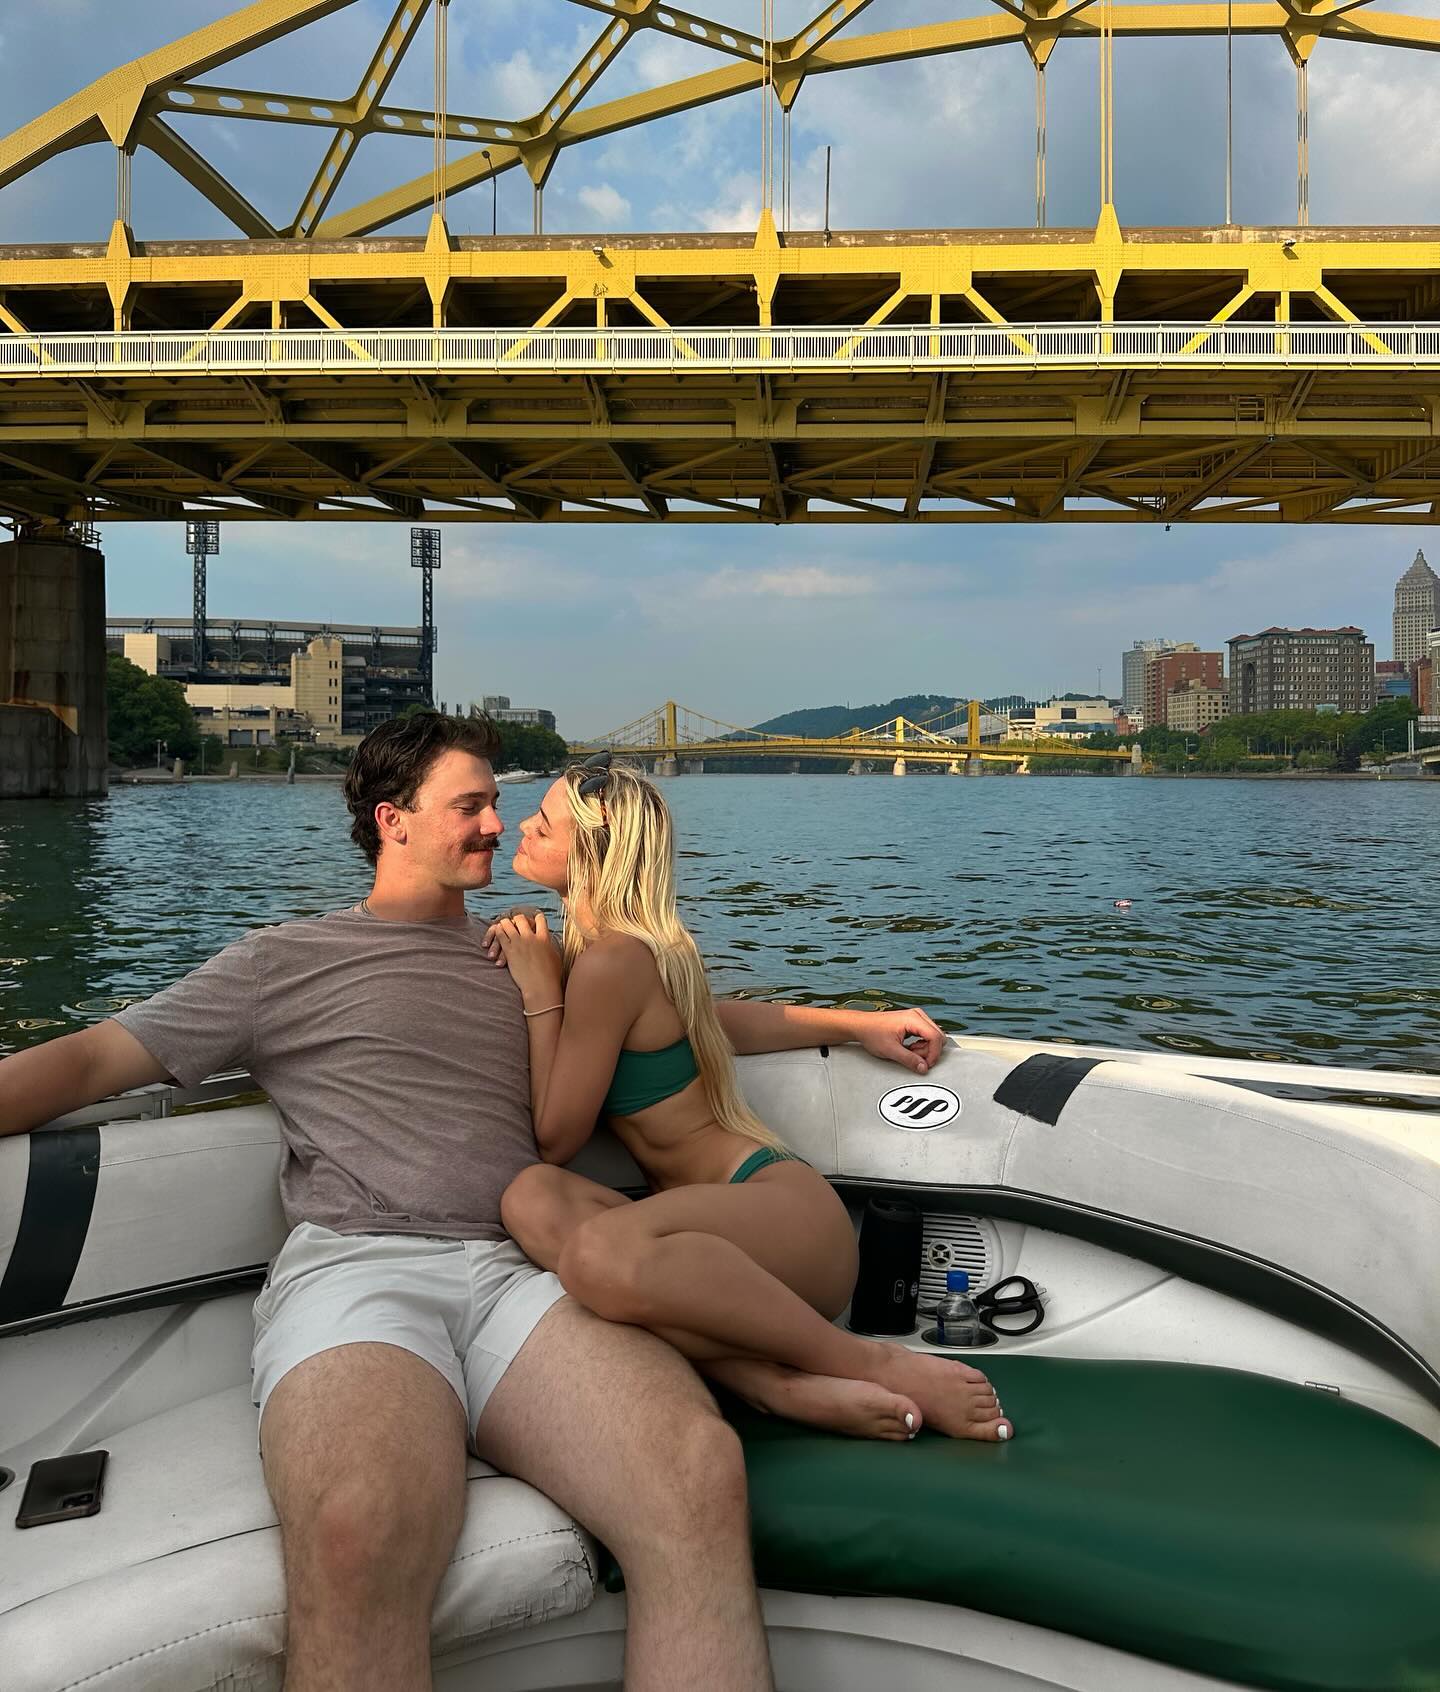 The loved-up pair enjoyed a romantic boat trip down the Monongahela River last week